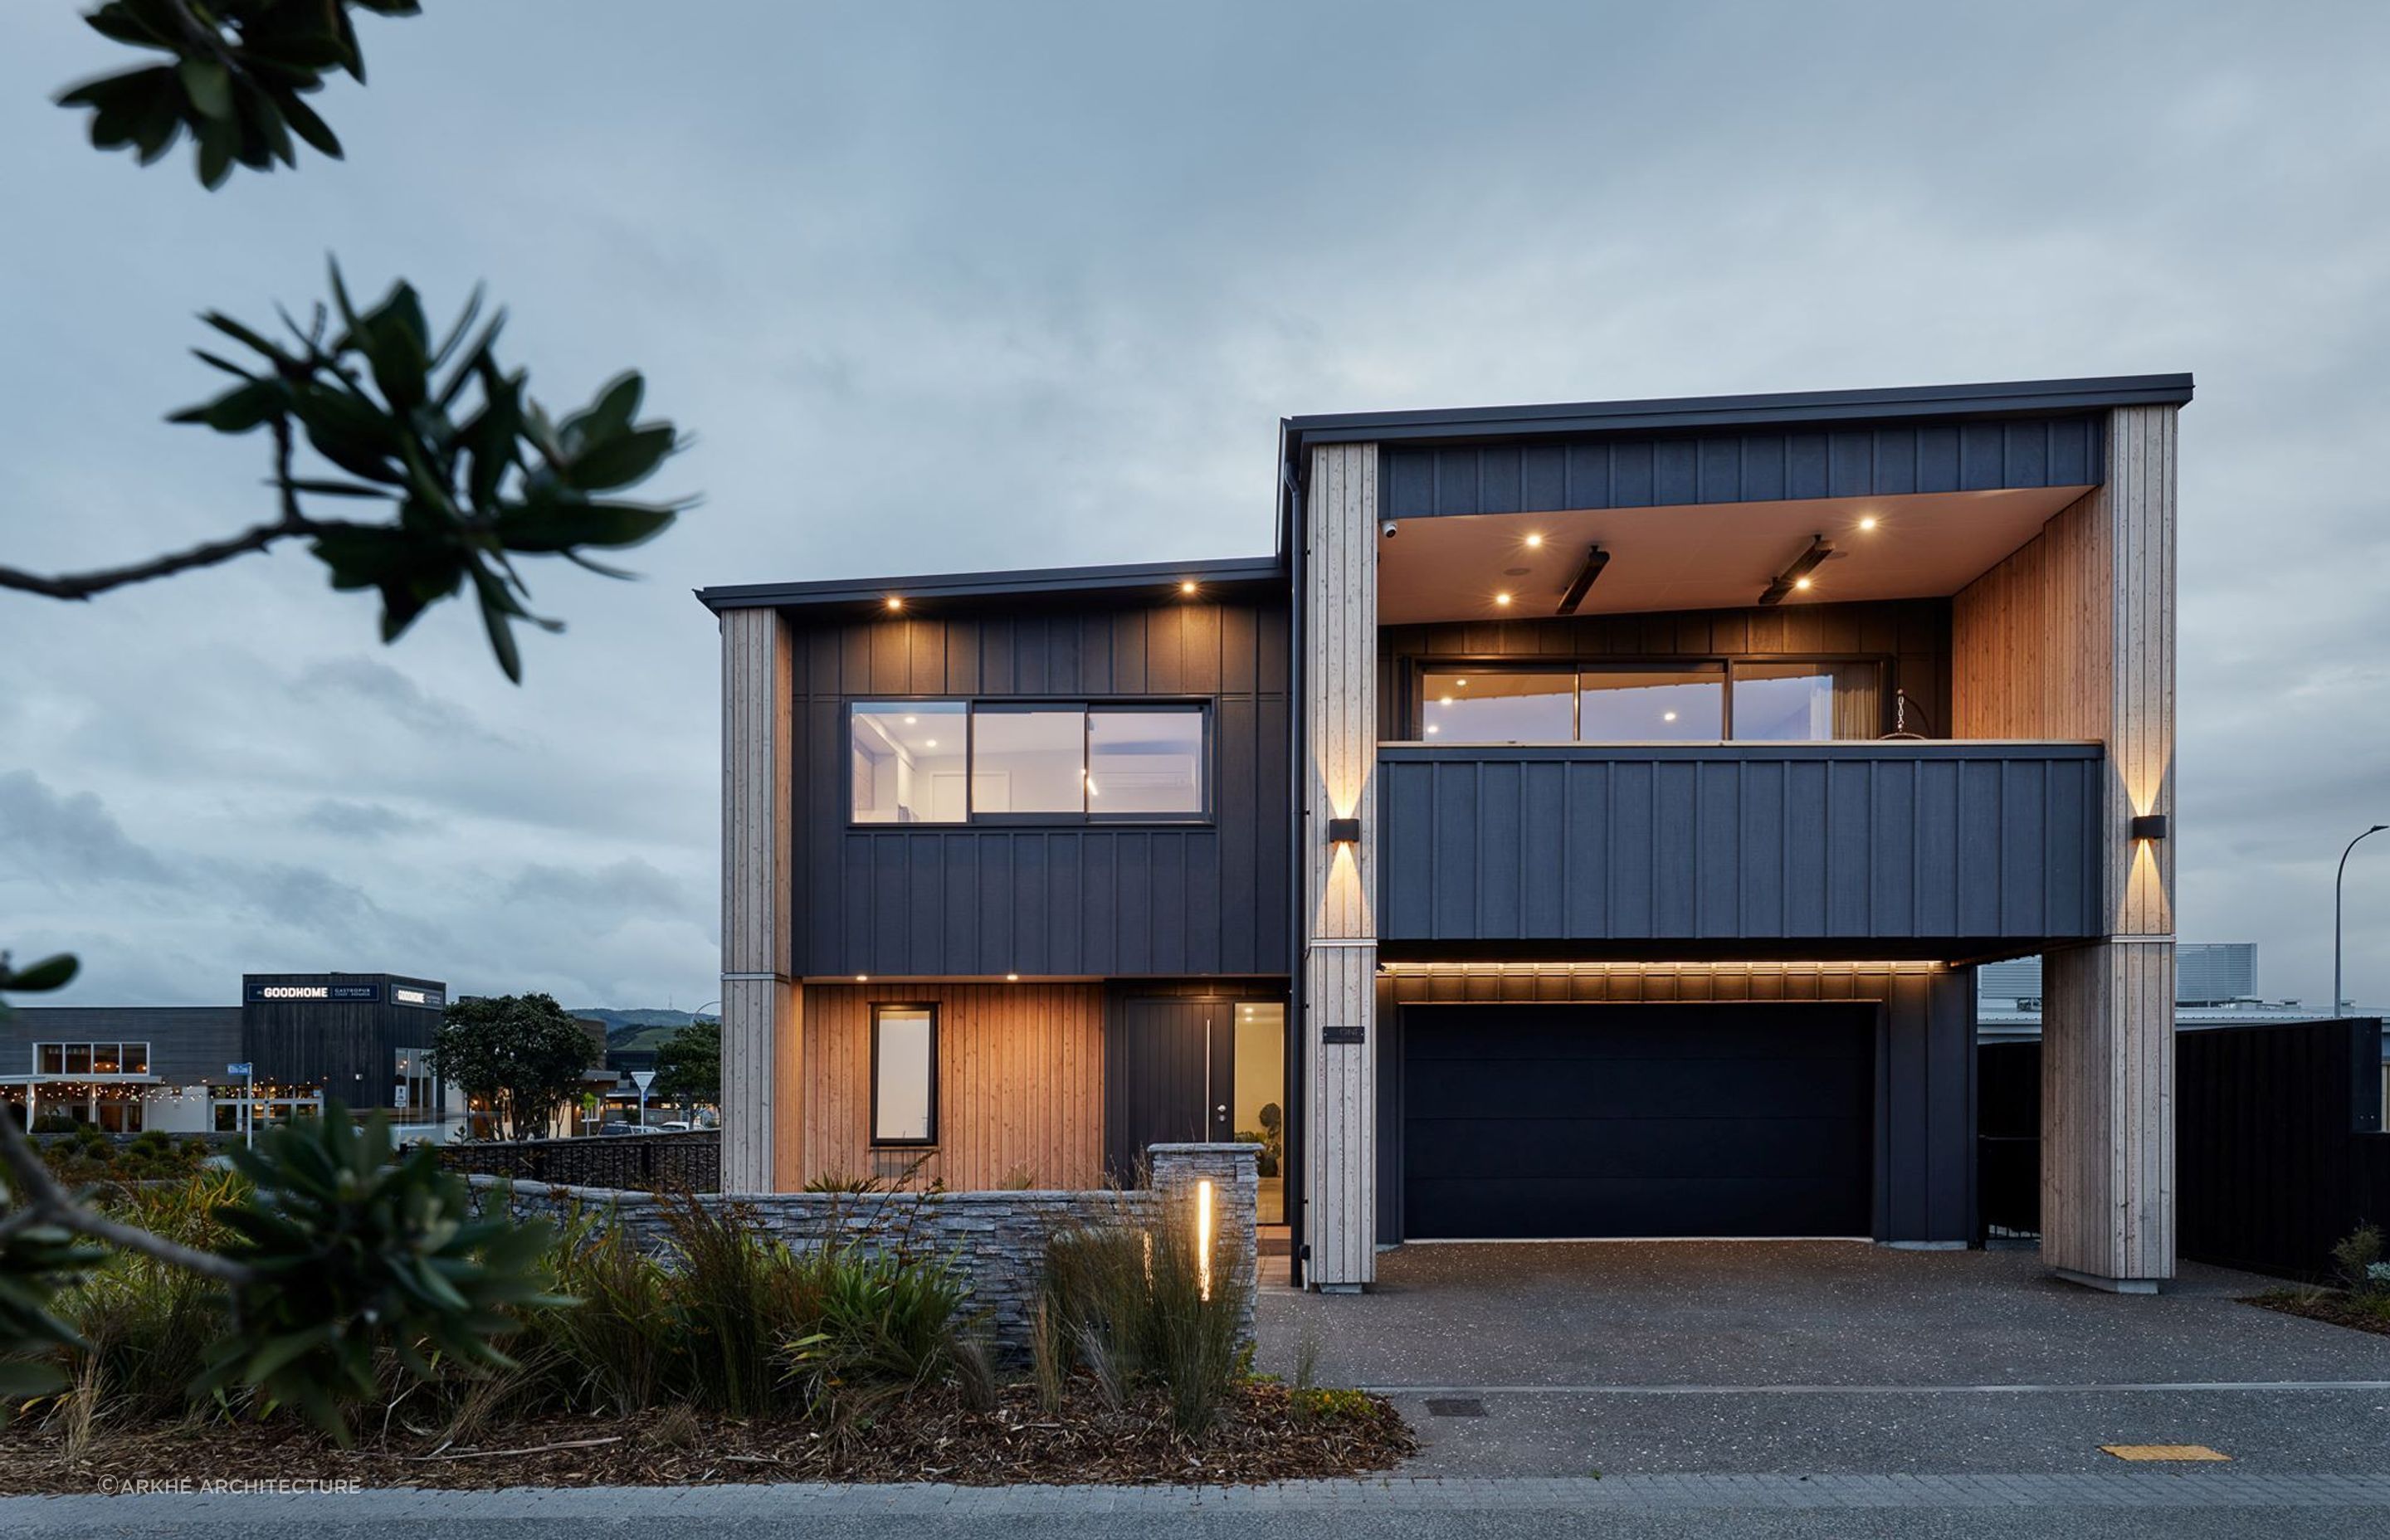 The exterior lighting design highlights the form and structure of home. | Photography: Amanda Aitken